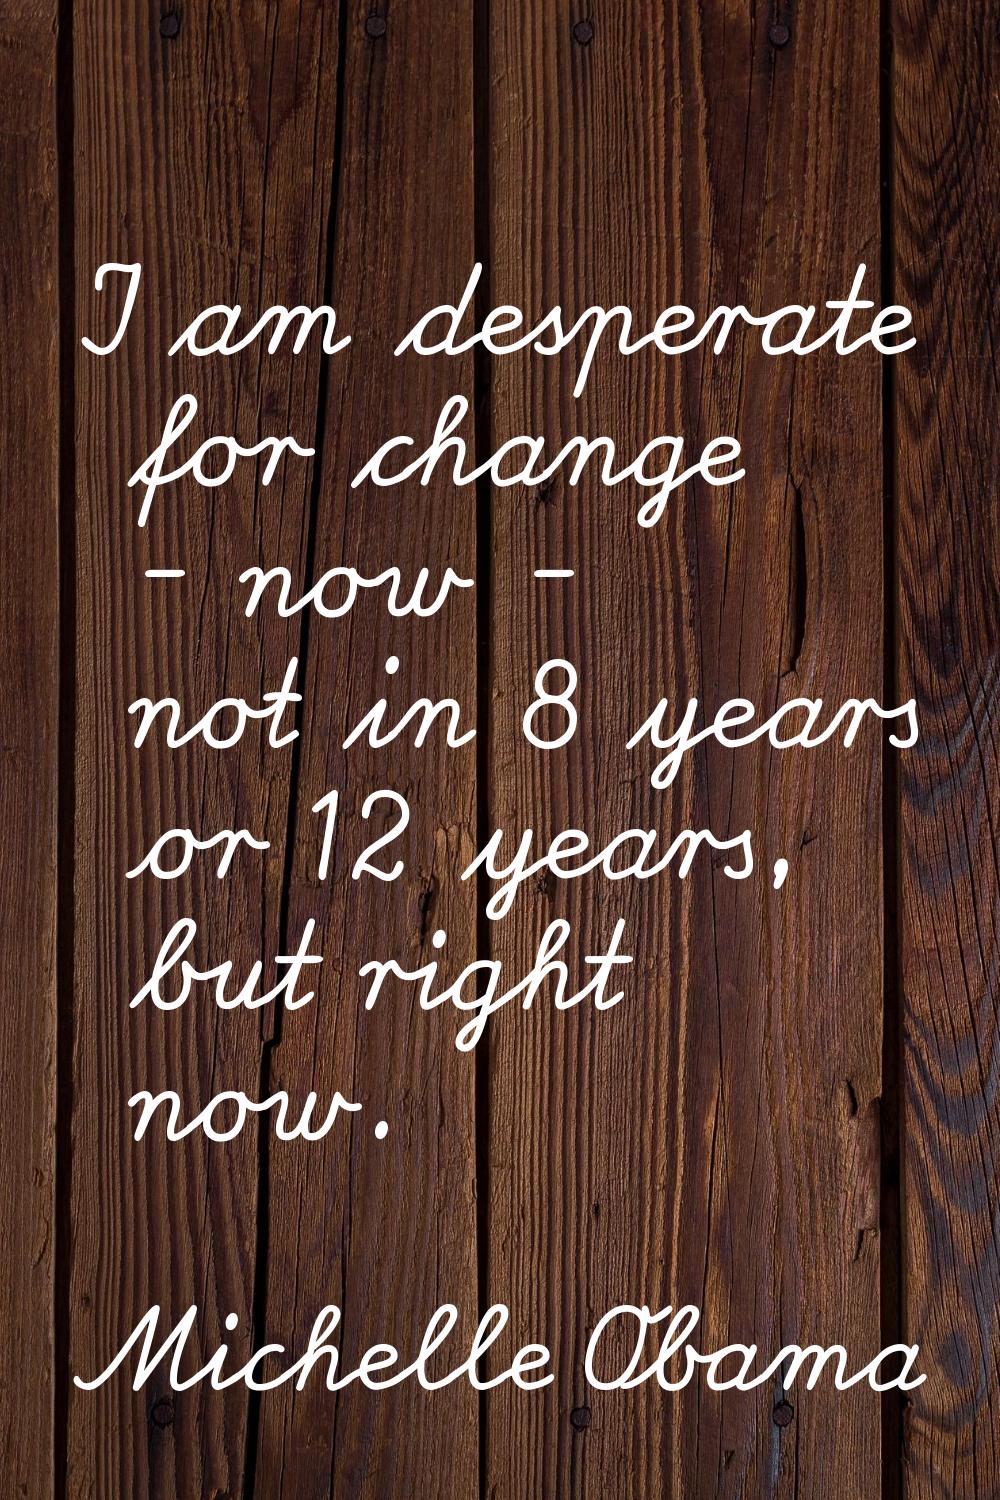 I am desperate for change - now - not in 8 years or 12 years, but right now.